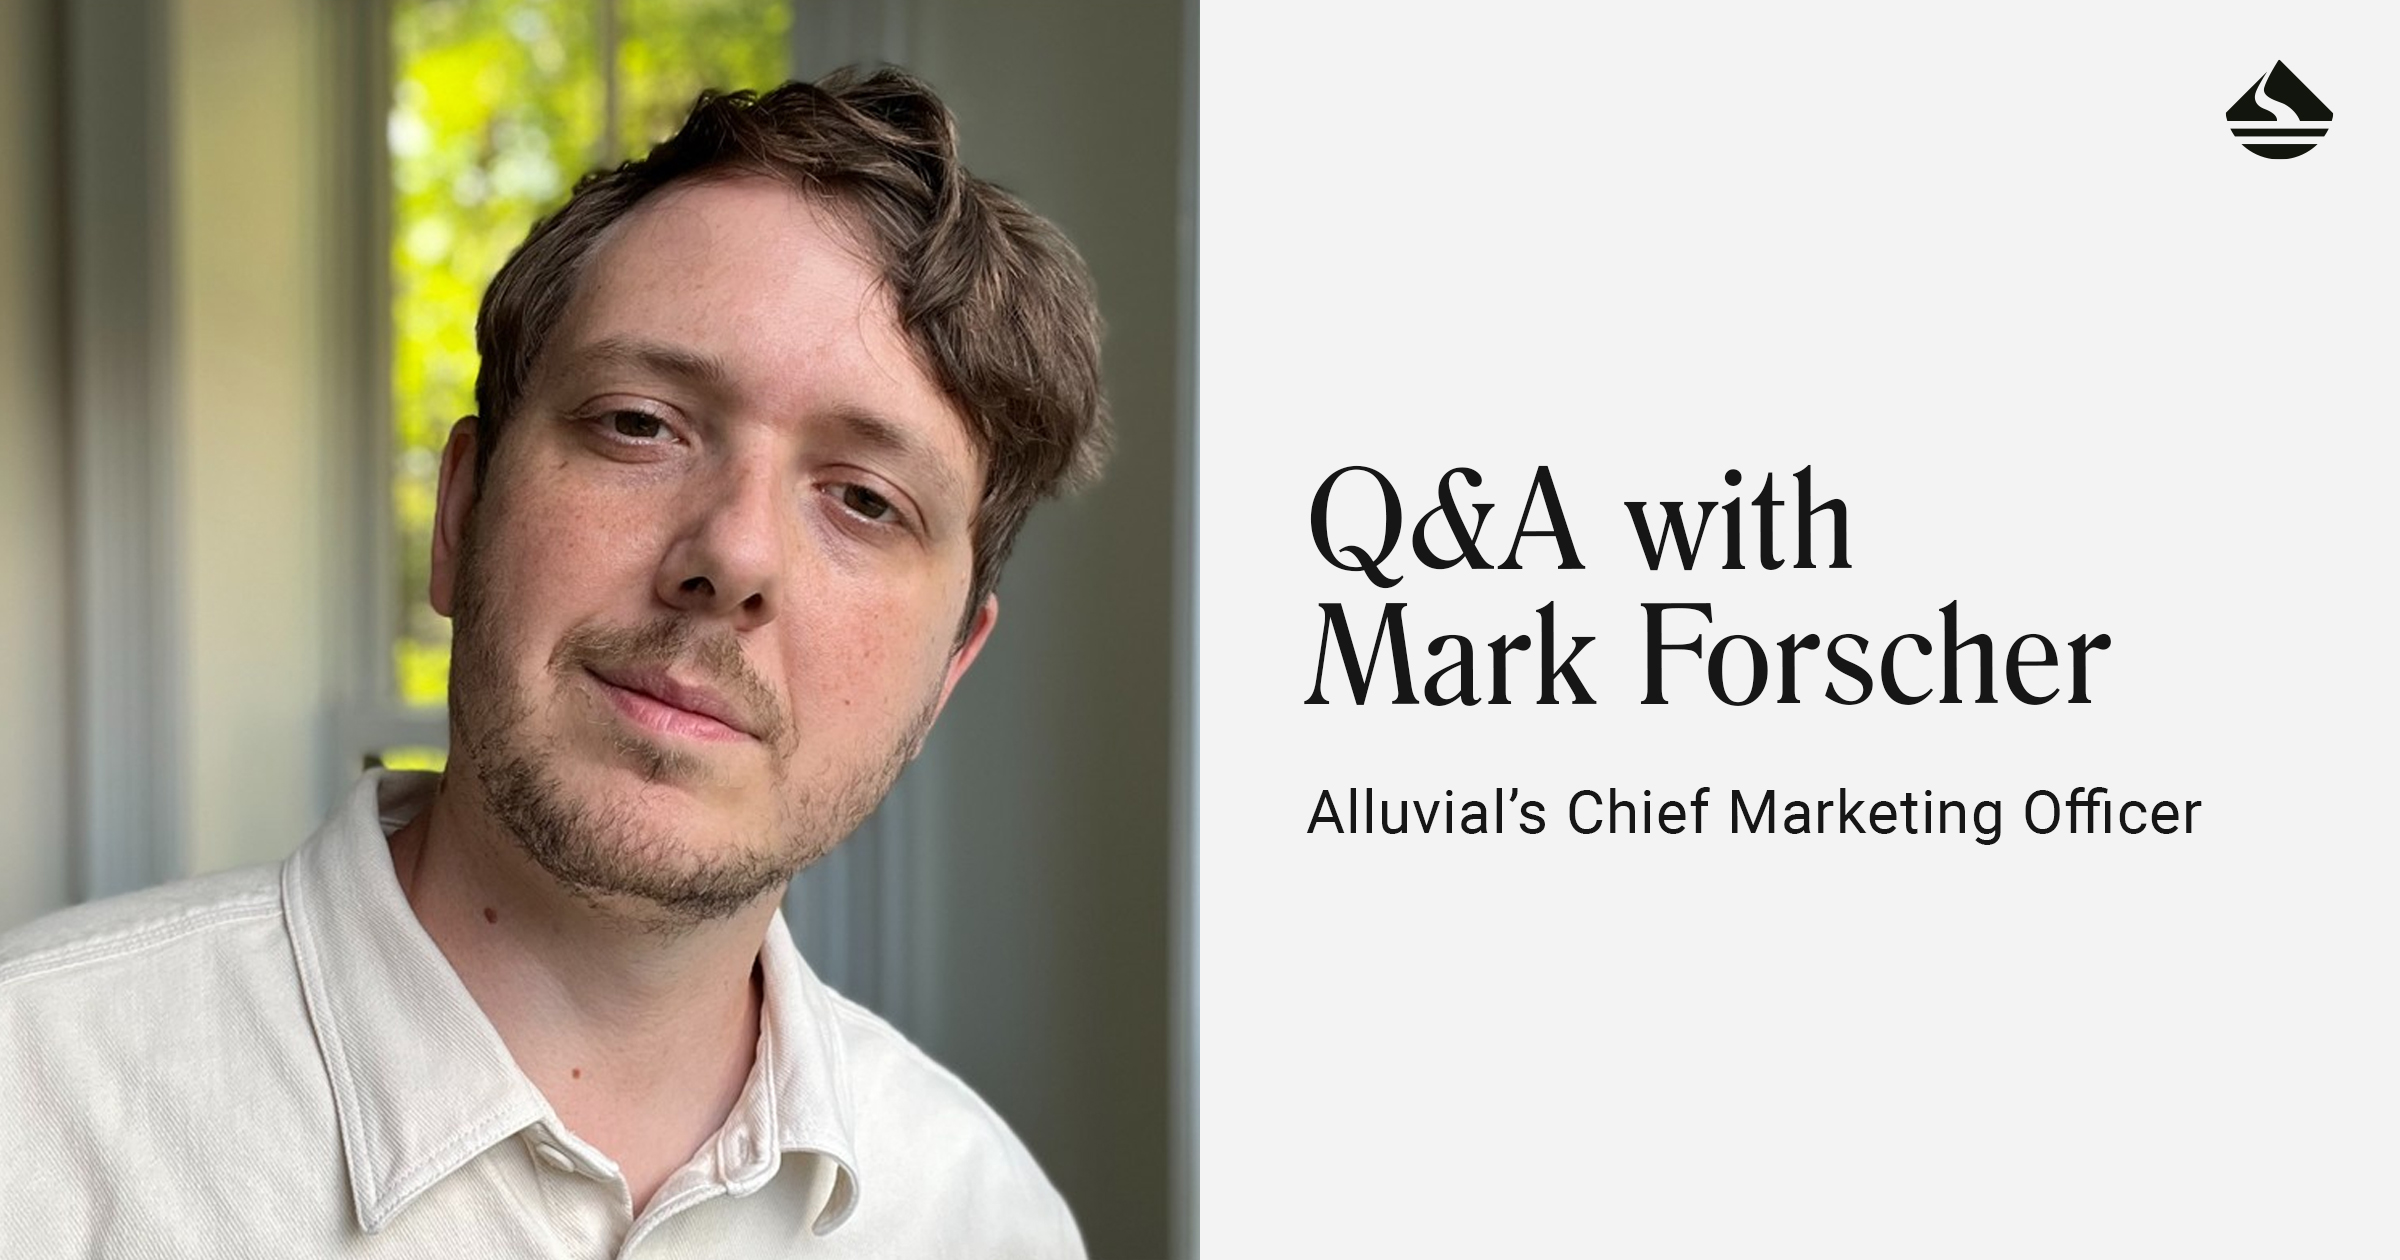 Q&A with Mark Forscher, Chief Marketing Officer at Alluvial